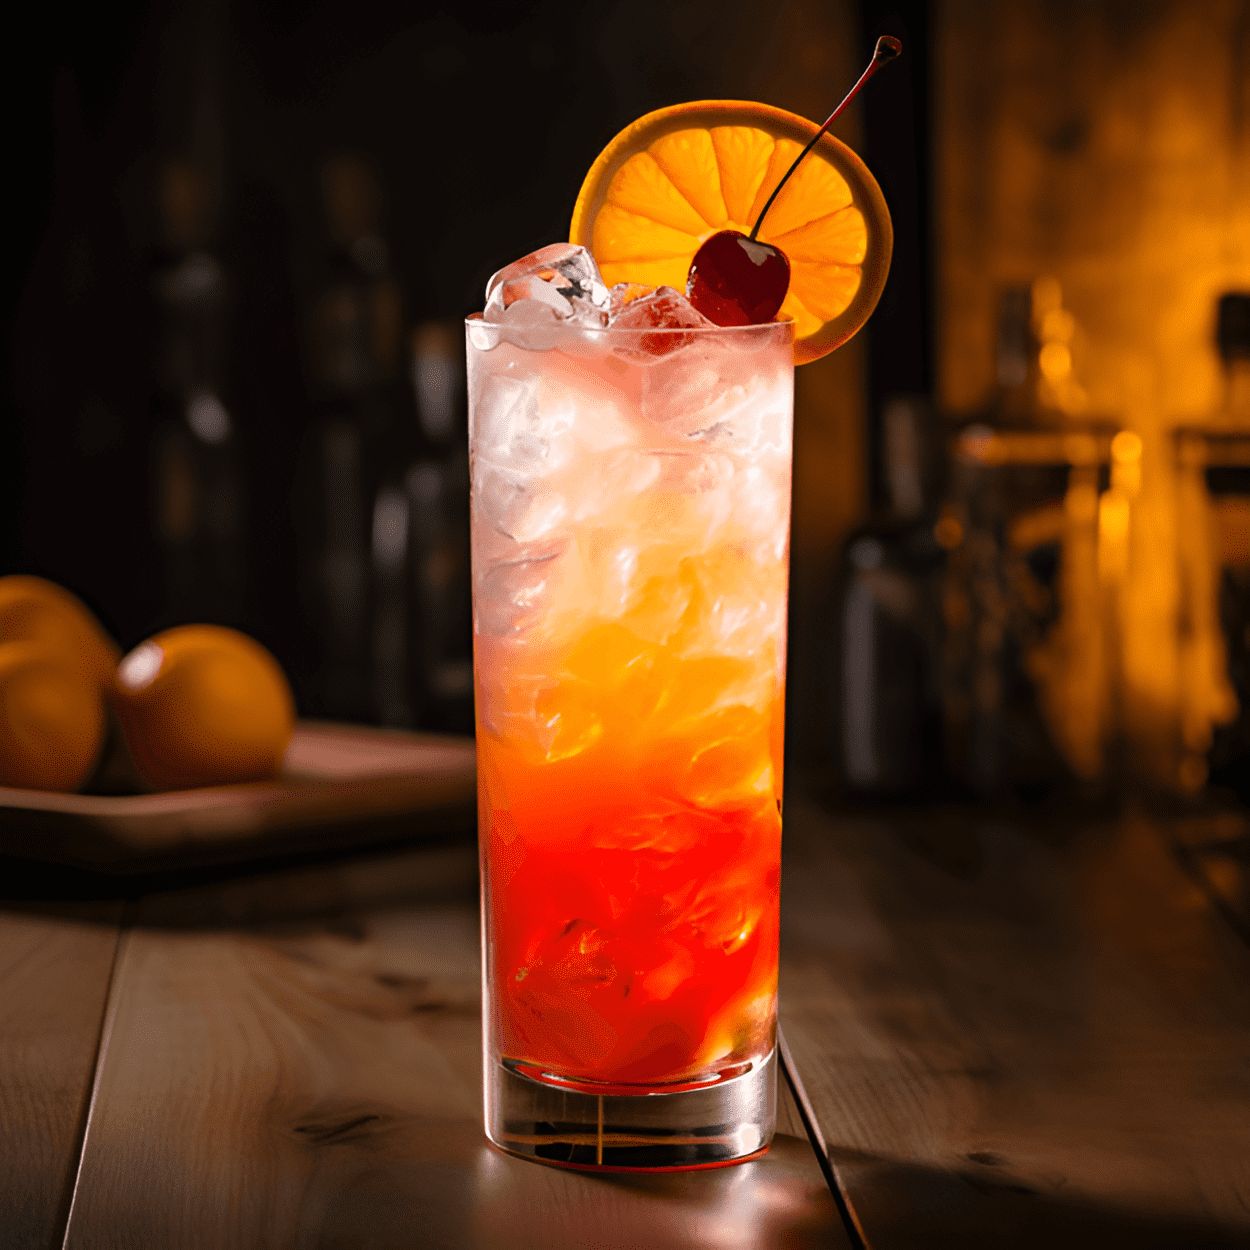 The Soju Sunrise is a fruity, sweet, and slightly tangy cocktail with a hint of tartness from the grenadine. It is light and refreshing, making it perfect for warm weather or as a palate cleanser between heavier drinks.